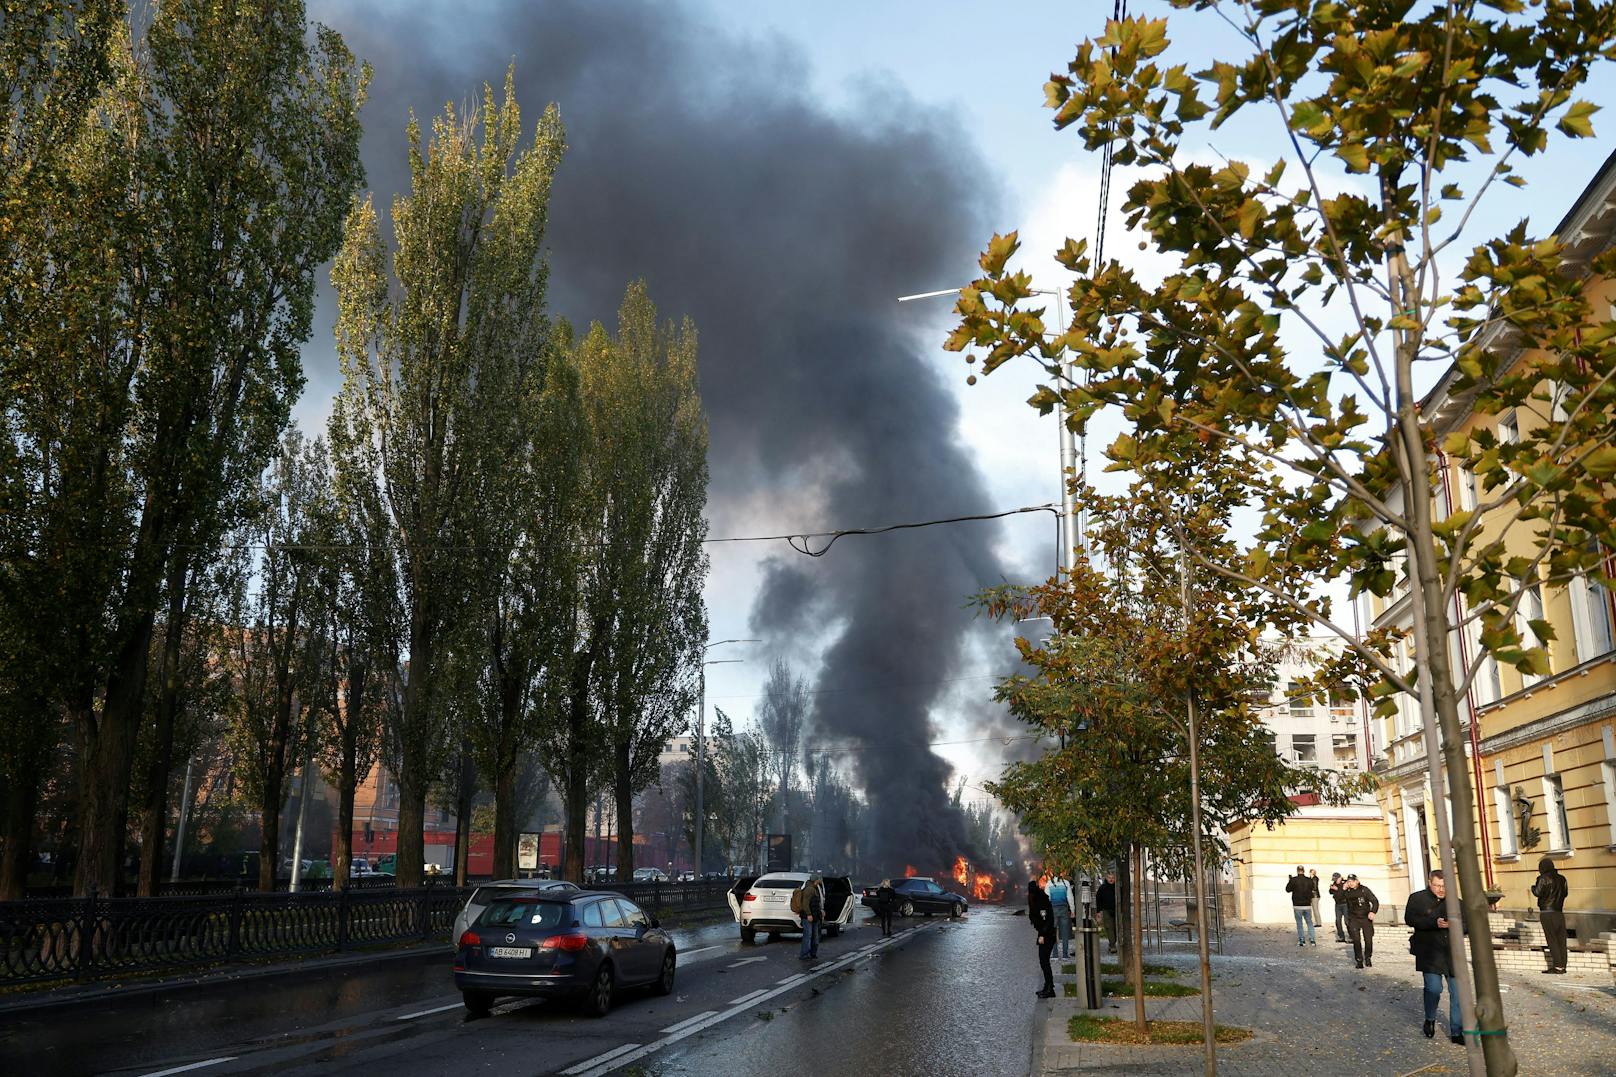 Cars are seen on fire after Russian missile strikes, as Russia's attack continues, in Kyiv, Ukraine October 10, 2022. REUTERS/Valentyn Ogirenko